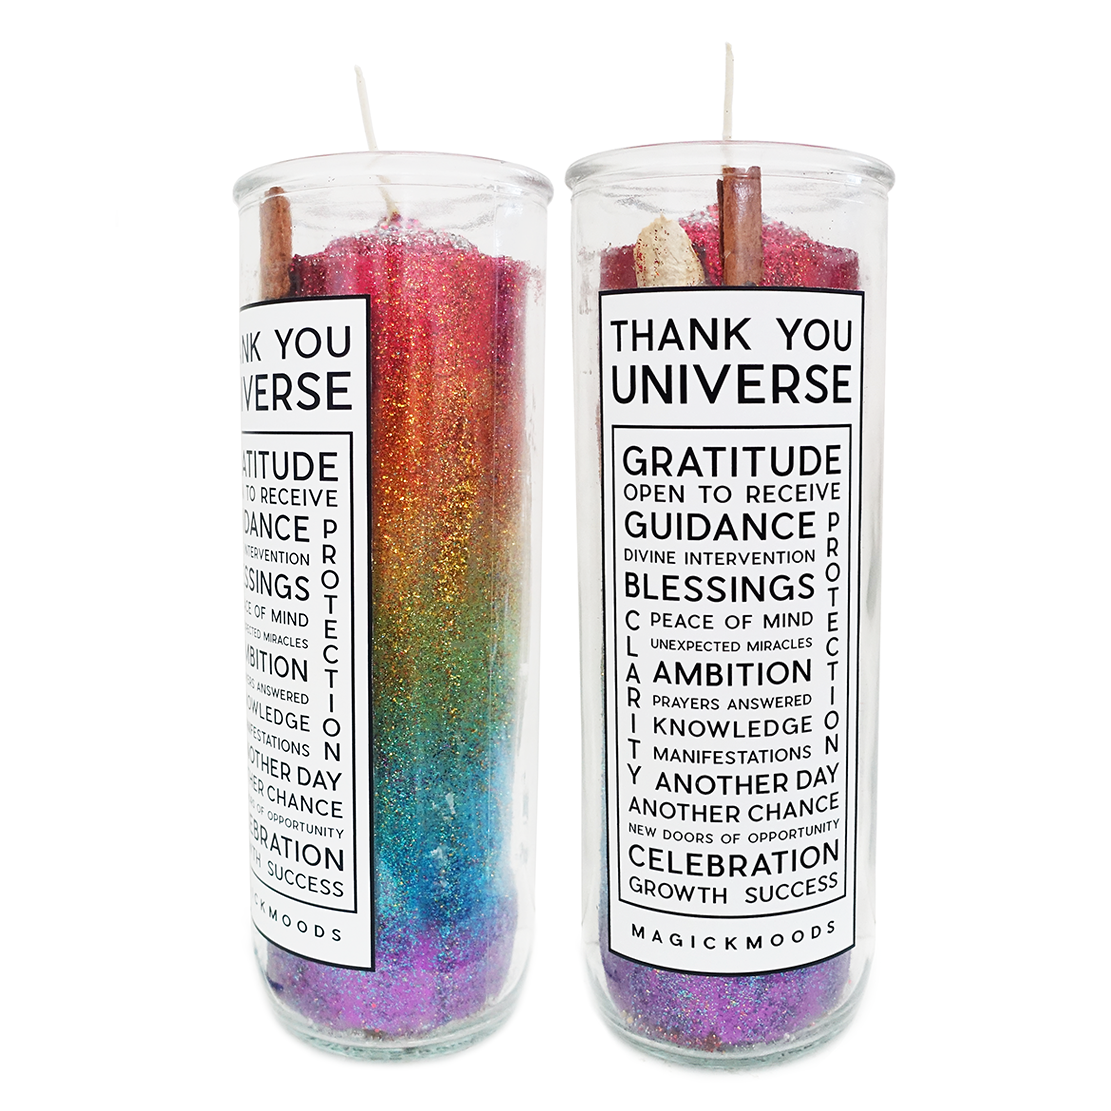 Thank You Universe 7-Day Meditation Candle - PREORDER - Ships by Feb 26, 2024